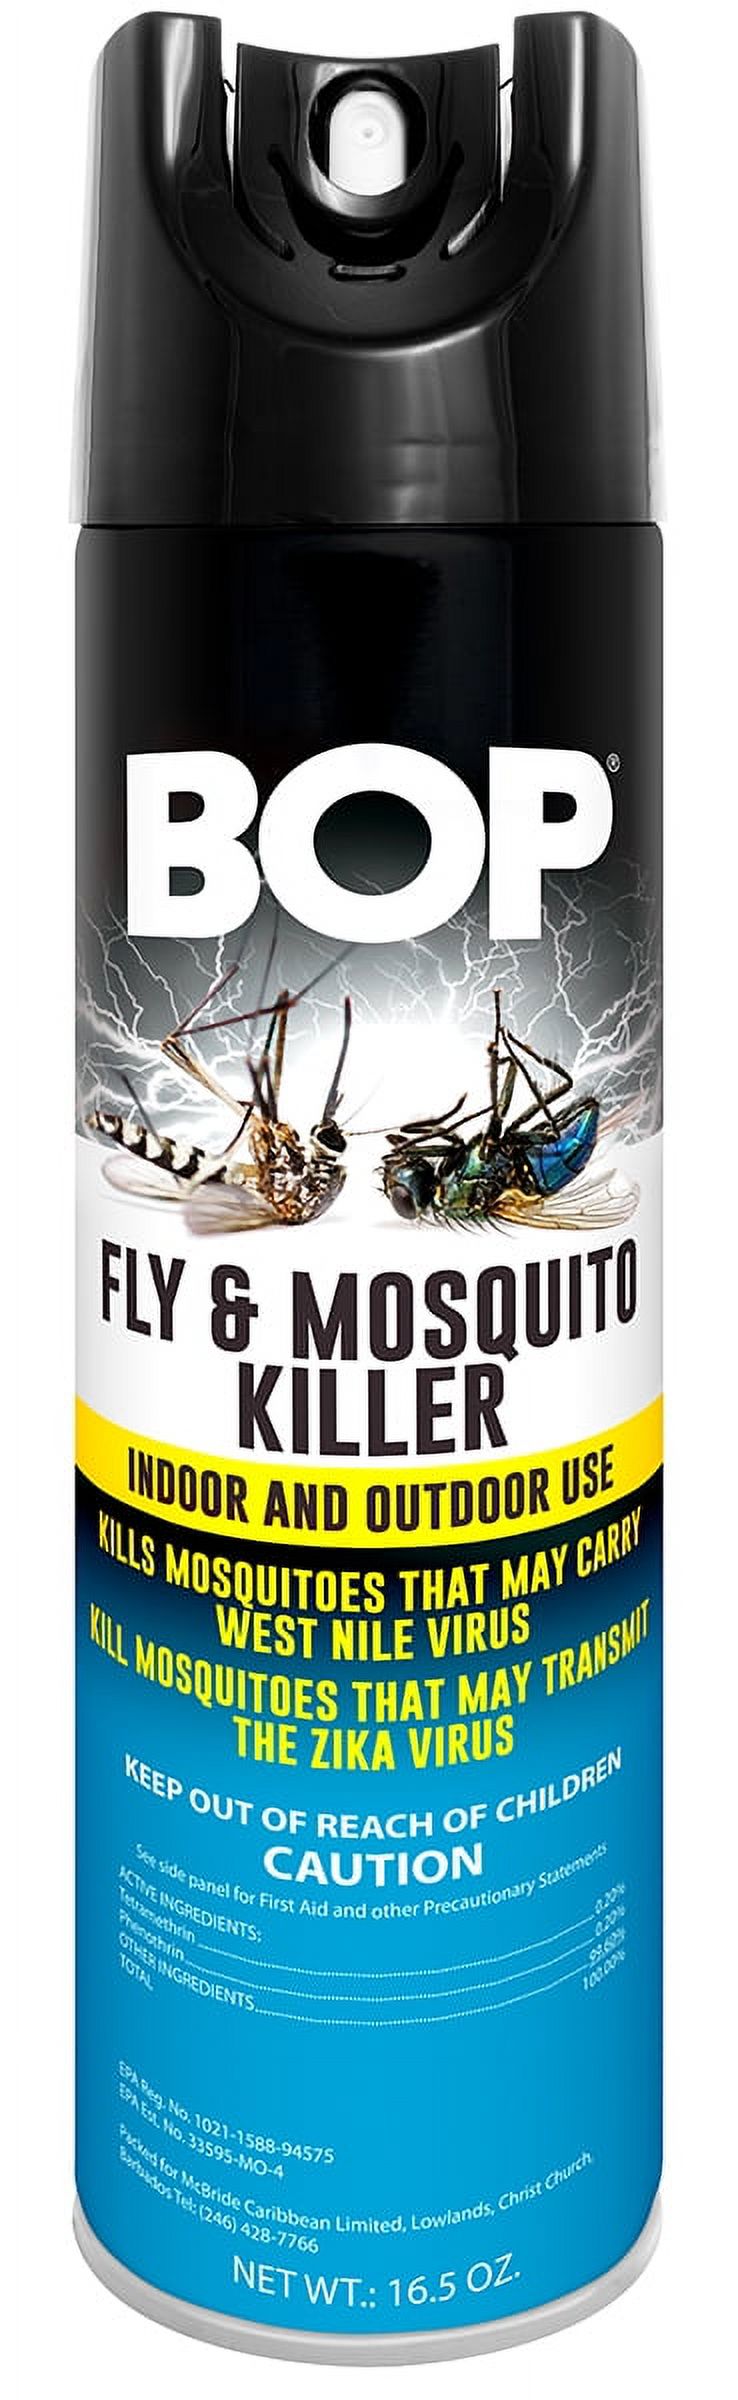 BOP Fly and Mosquito Killer, 16.5 oz, Easy To Use Pest Control Spray, Kills Bugs On Contact And Keeps Your Home Insect Free, Indoor/Outdoor Use For Quick Results - image 1 of 8